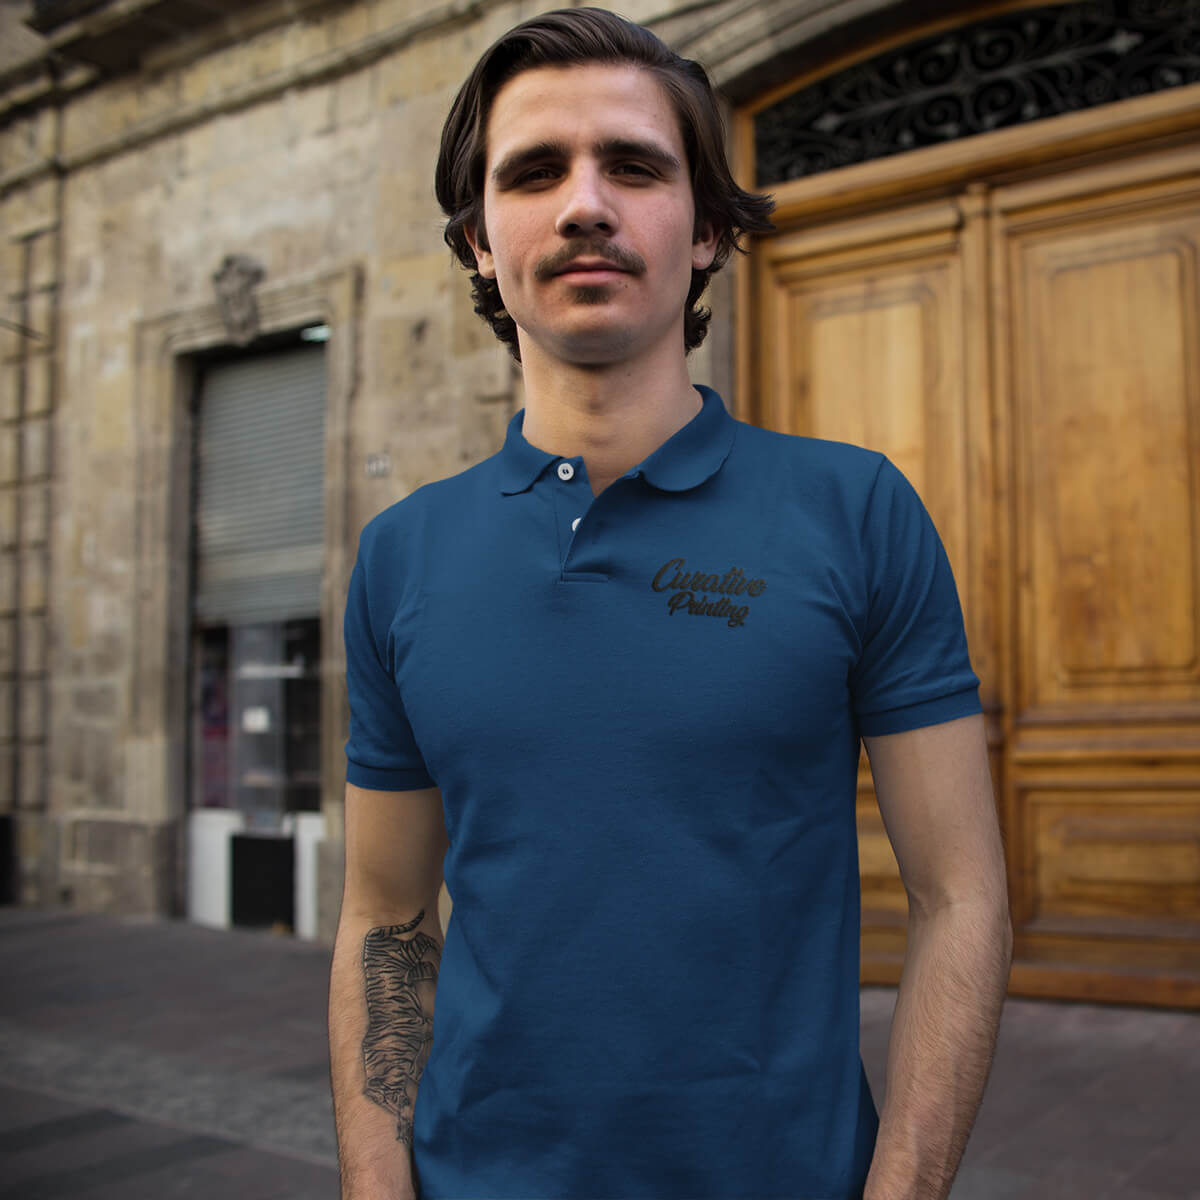 Man stands in the street wearing a blue polo collar shirt with black curative printing logo imprint